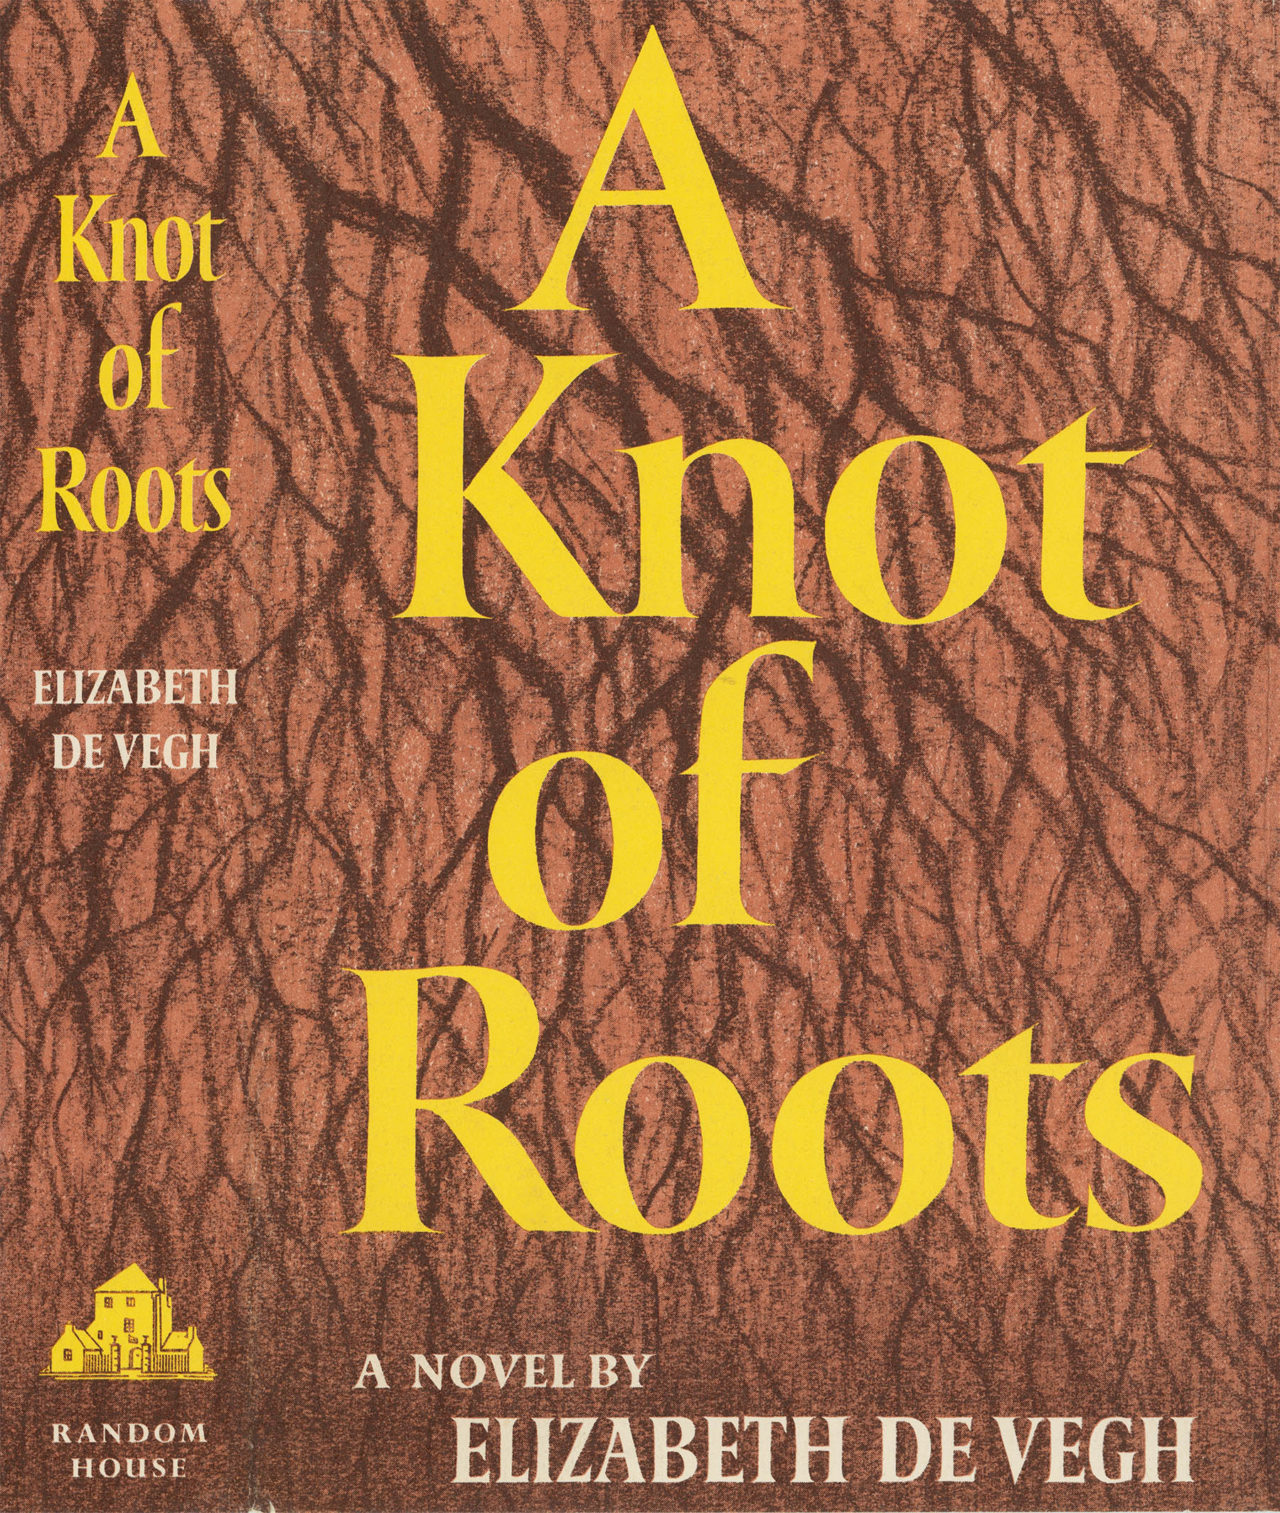 Book jacket of A Knot of Roots